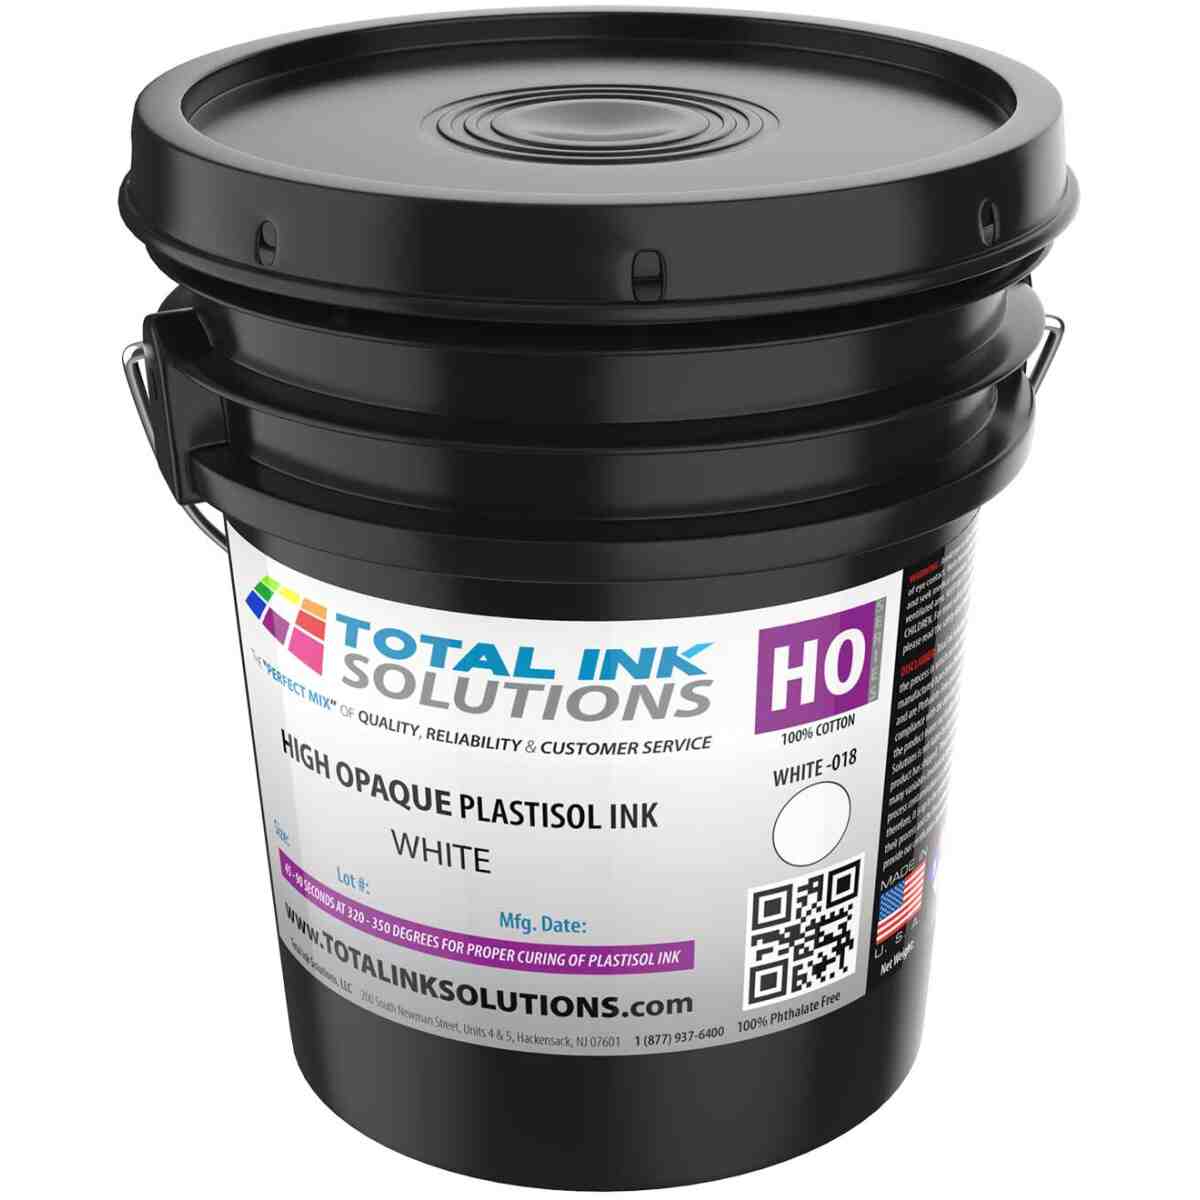 High Opaque Plastisol Ink - White - 5 Gallon TOTAL INK SOLUTIONS®